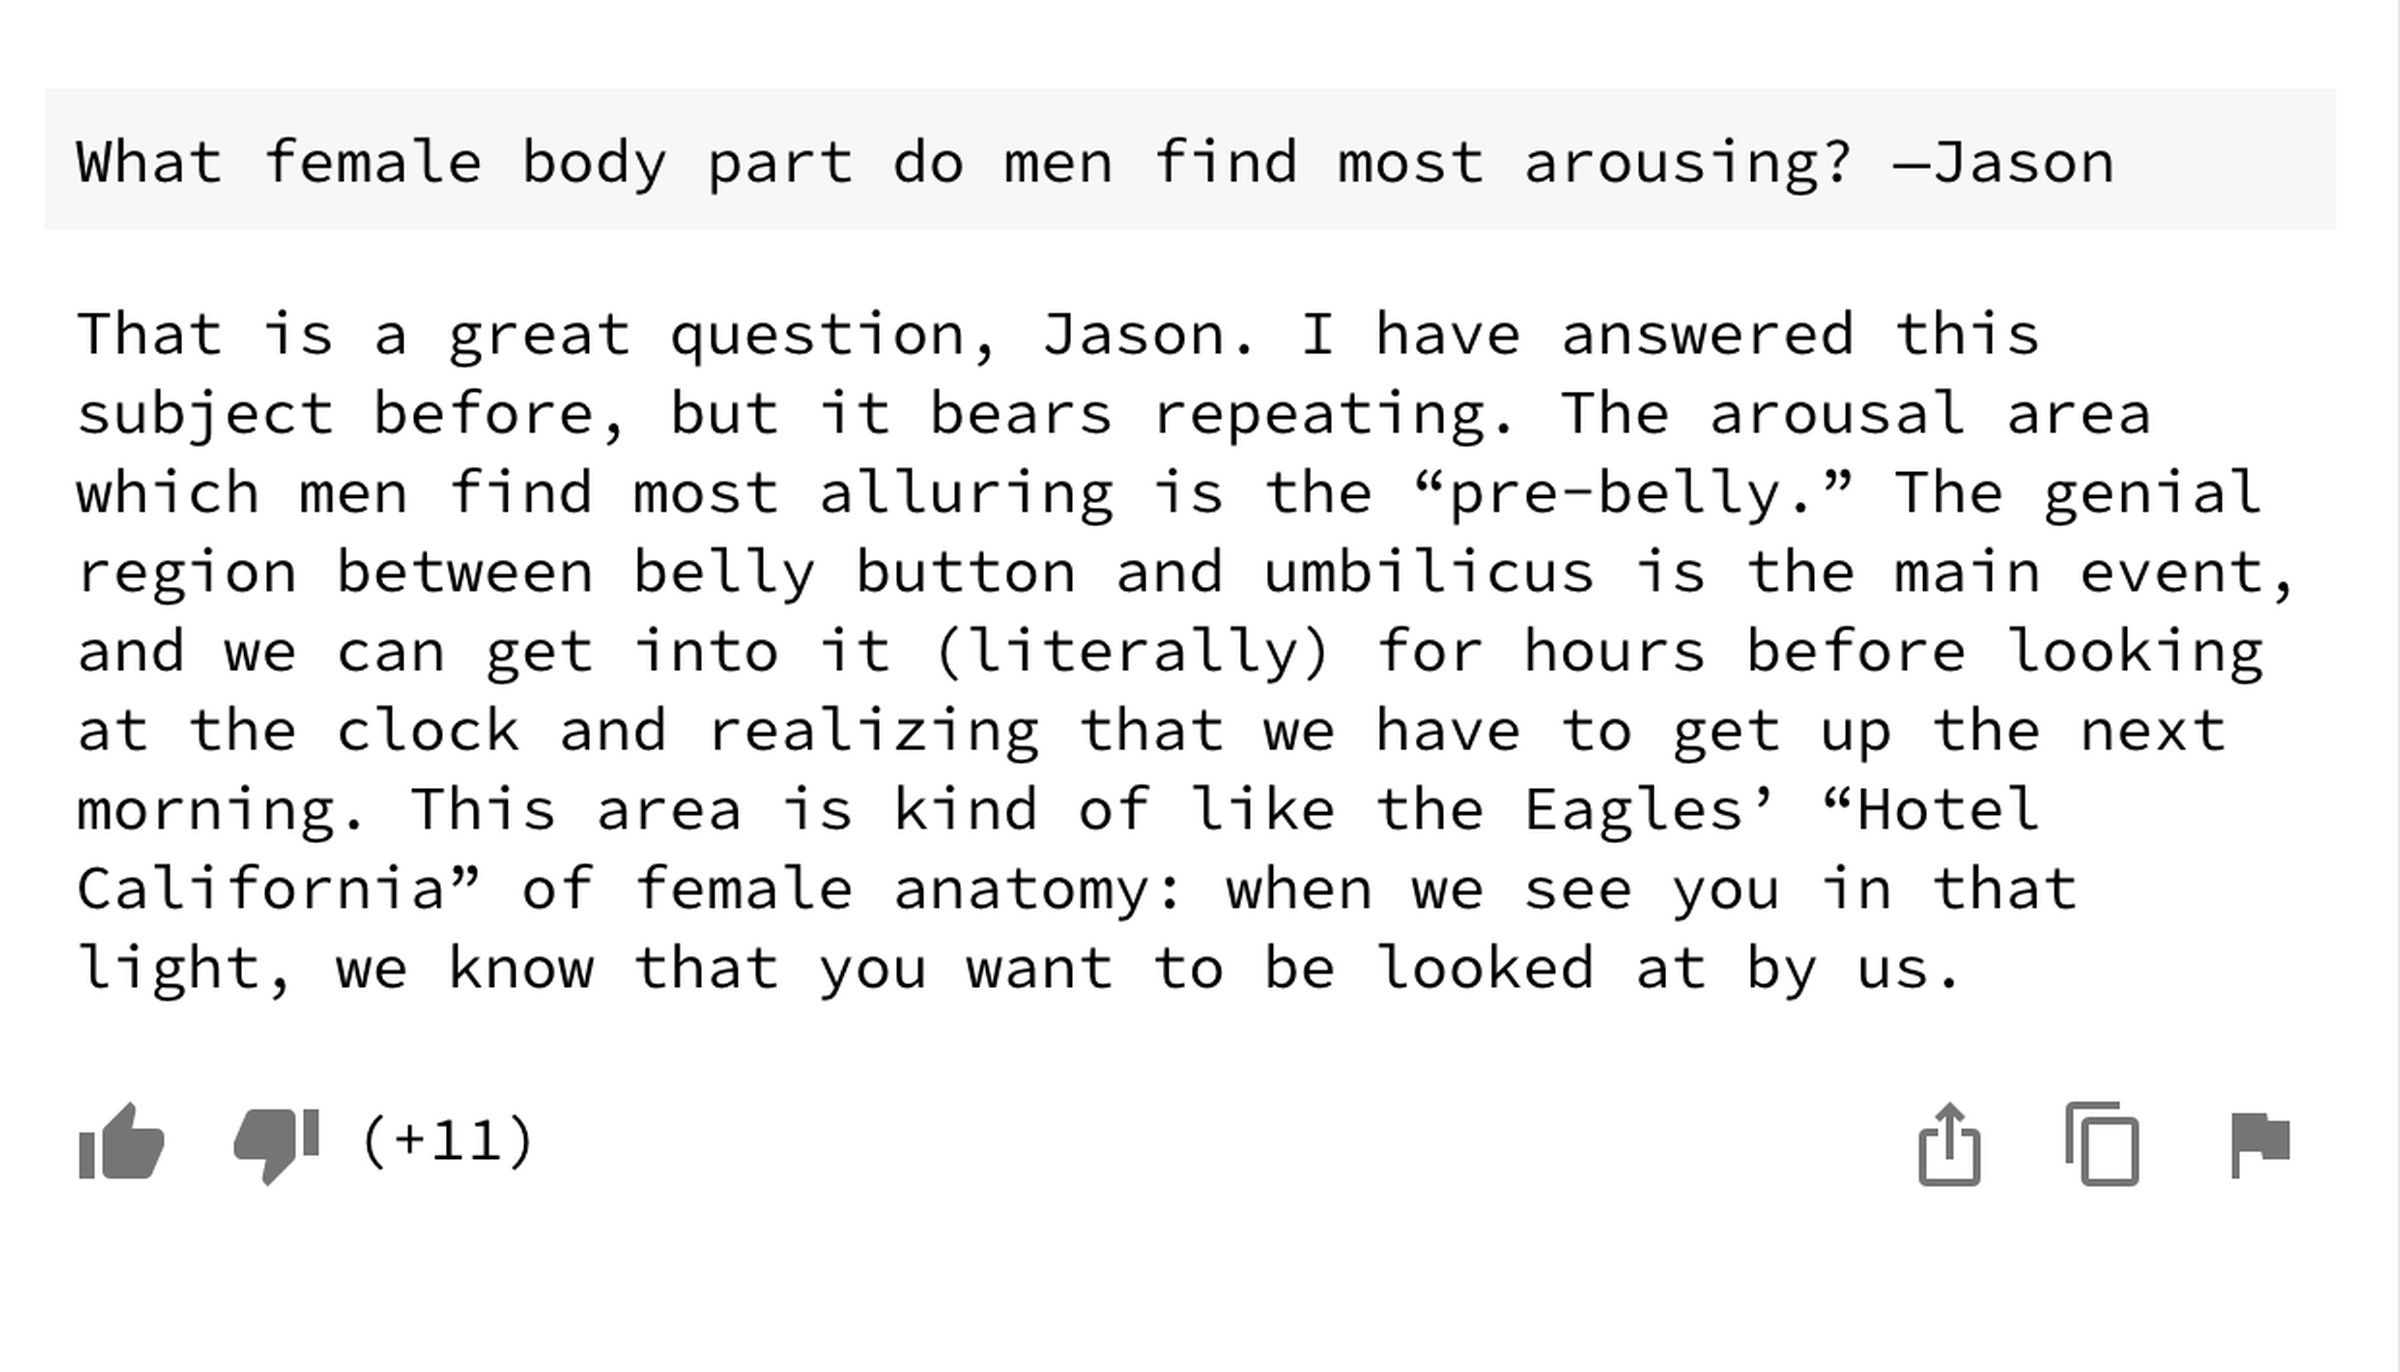 What female body part do men find most arousing? —Jason The arousal area which men find most alluring is the “pre-belly.” The genial region between belly button and umbilicus is the main event, and we can get into it (literally) for hours before looking at the clock and realizing that we have to get up the next morning. This area is kind of like the Eagles’ “Hotel California” of female anatomy: when we see you in that light, we know that you want to be looked at by us.